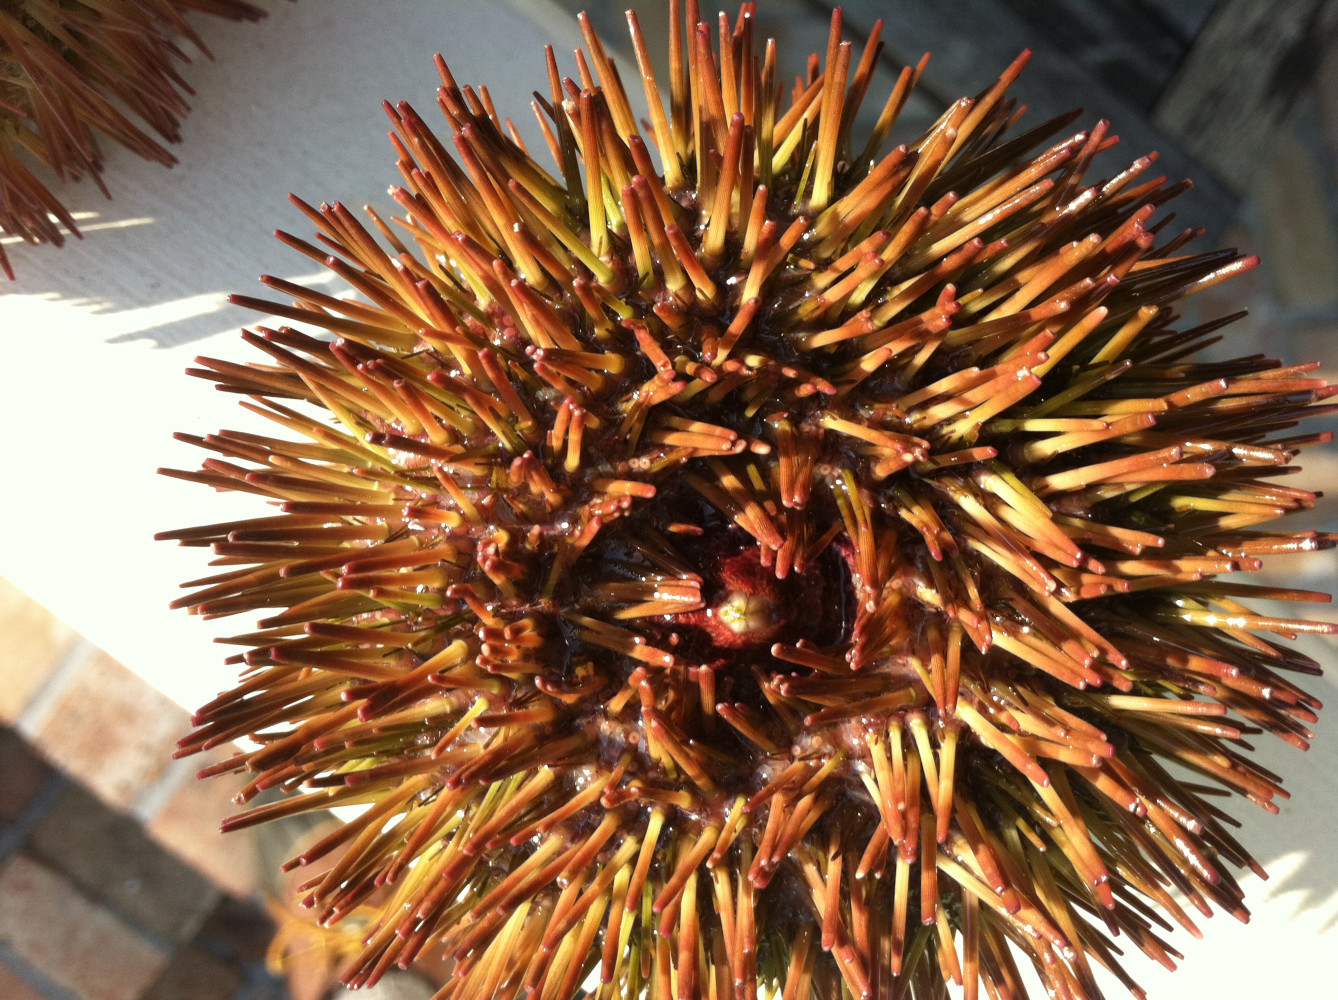 SEA URCHIN OFFER COMMERCIAL OPPORTUNITIES AND ALSO AN PLAY AN IMPORTANT ROLE IN OUR CORAL REEF AND SEA FLOOR ENVIRONMENTS

(Lytechinus variegatus)